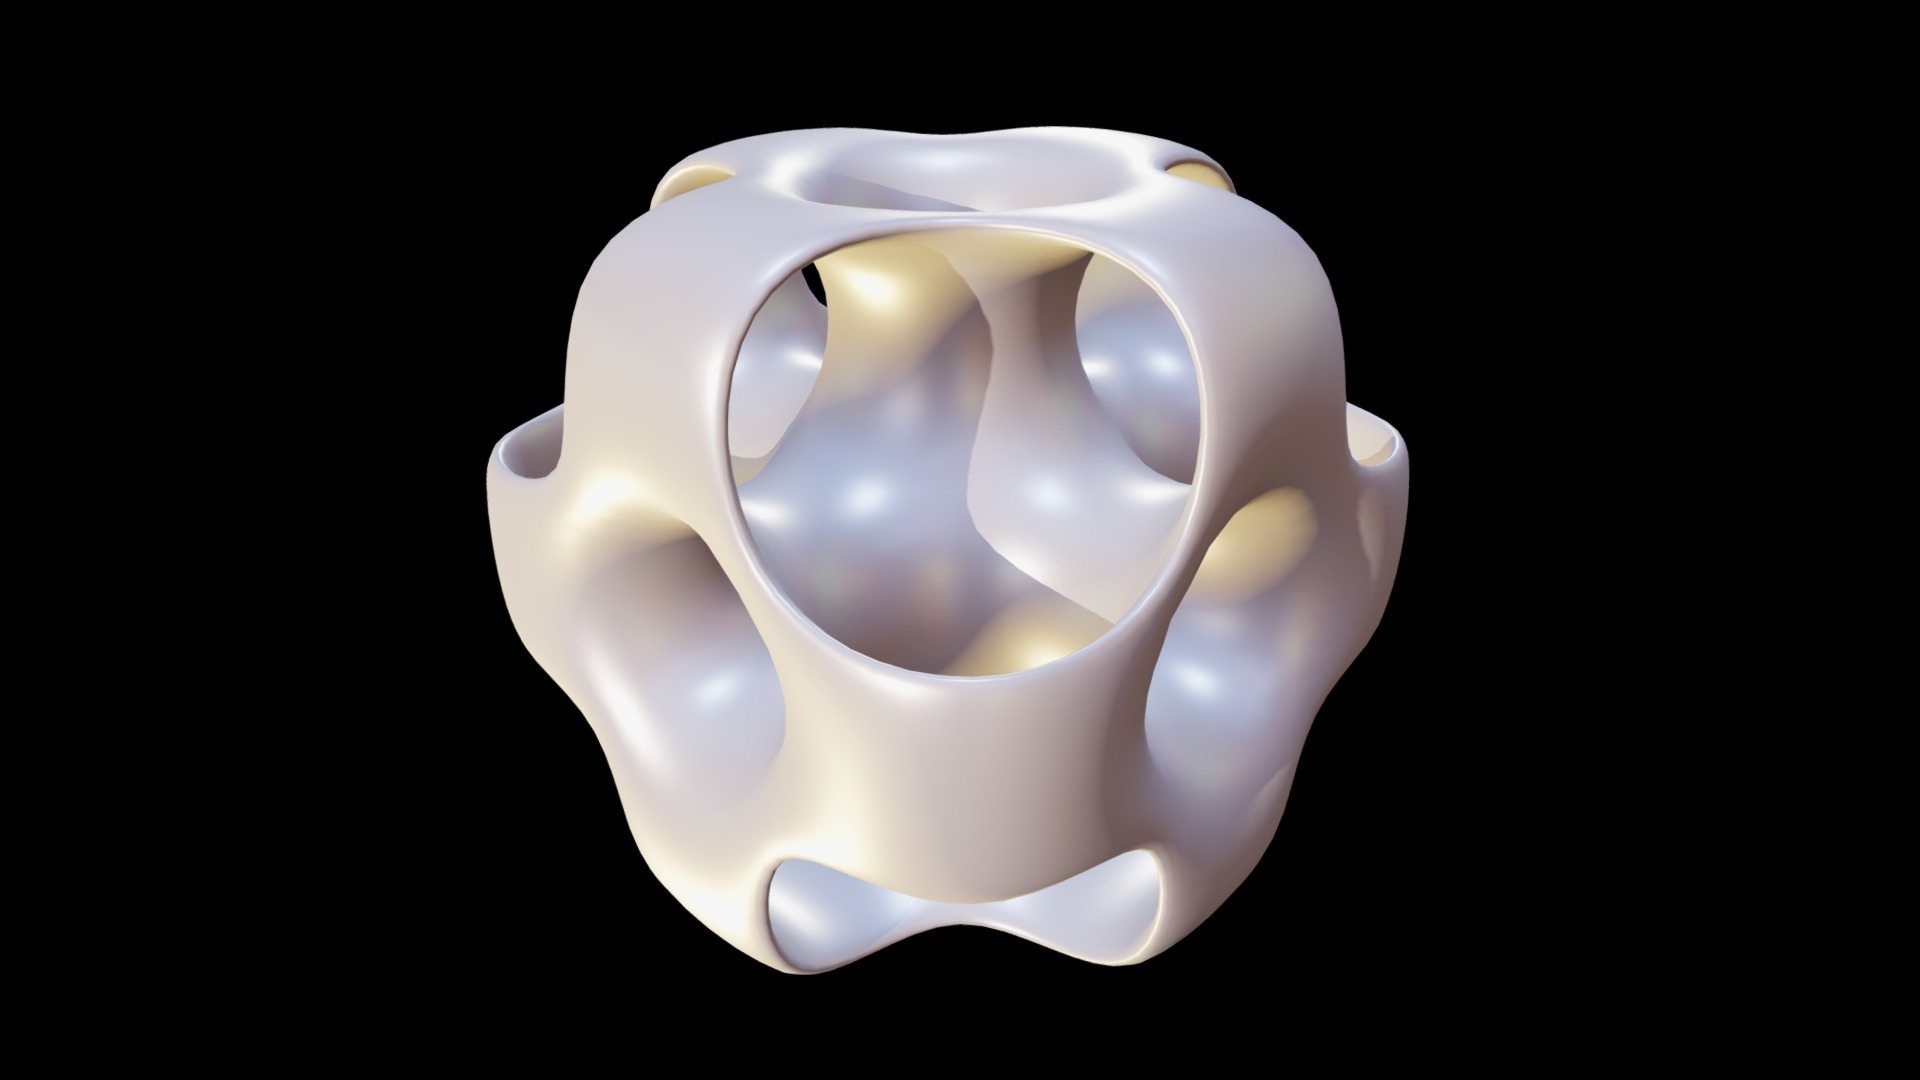 3D model Holed Cube - This is a 3D model of the Holed Cube. The 3D model is about a white and grey sphere.